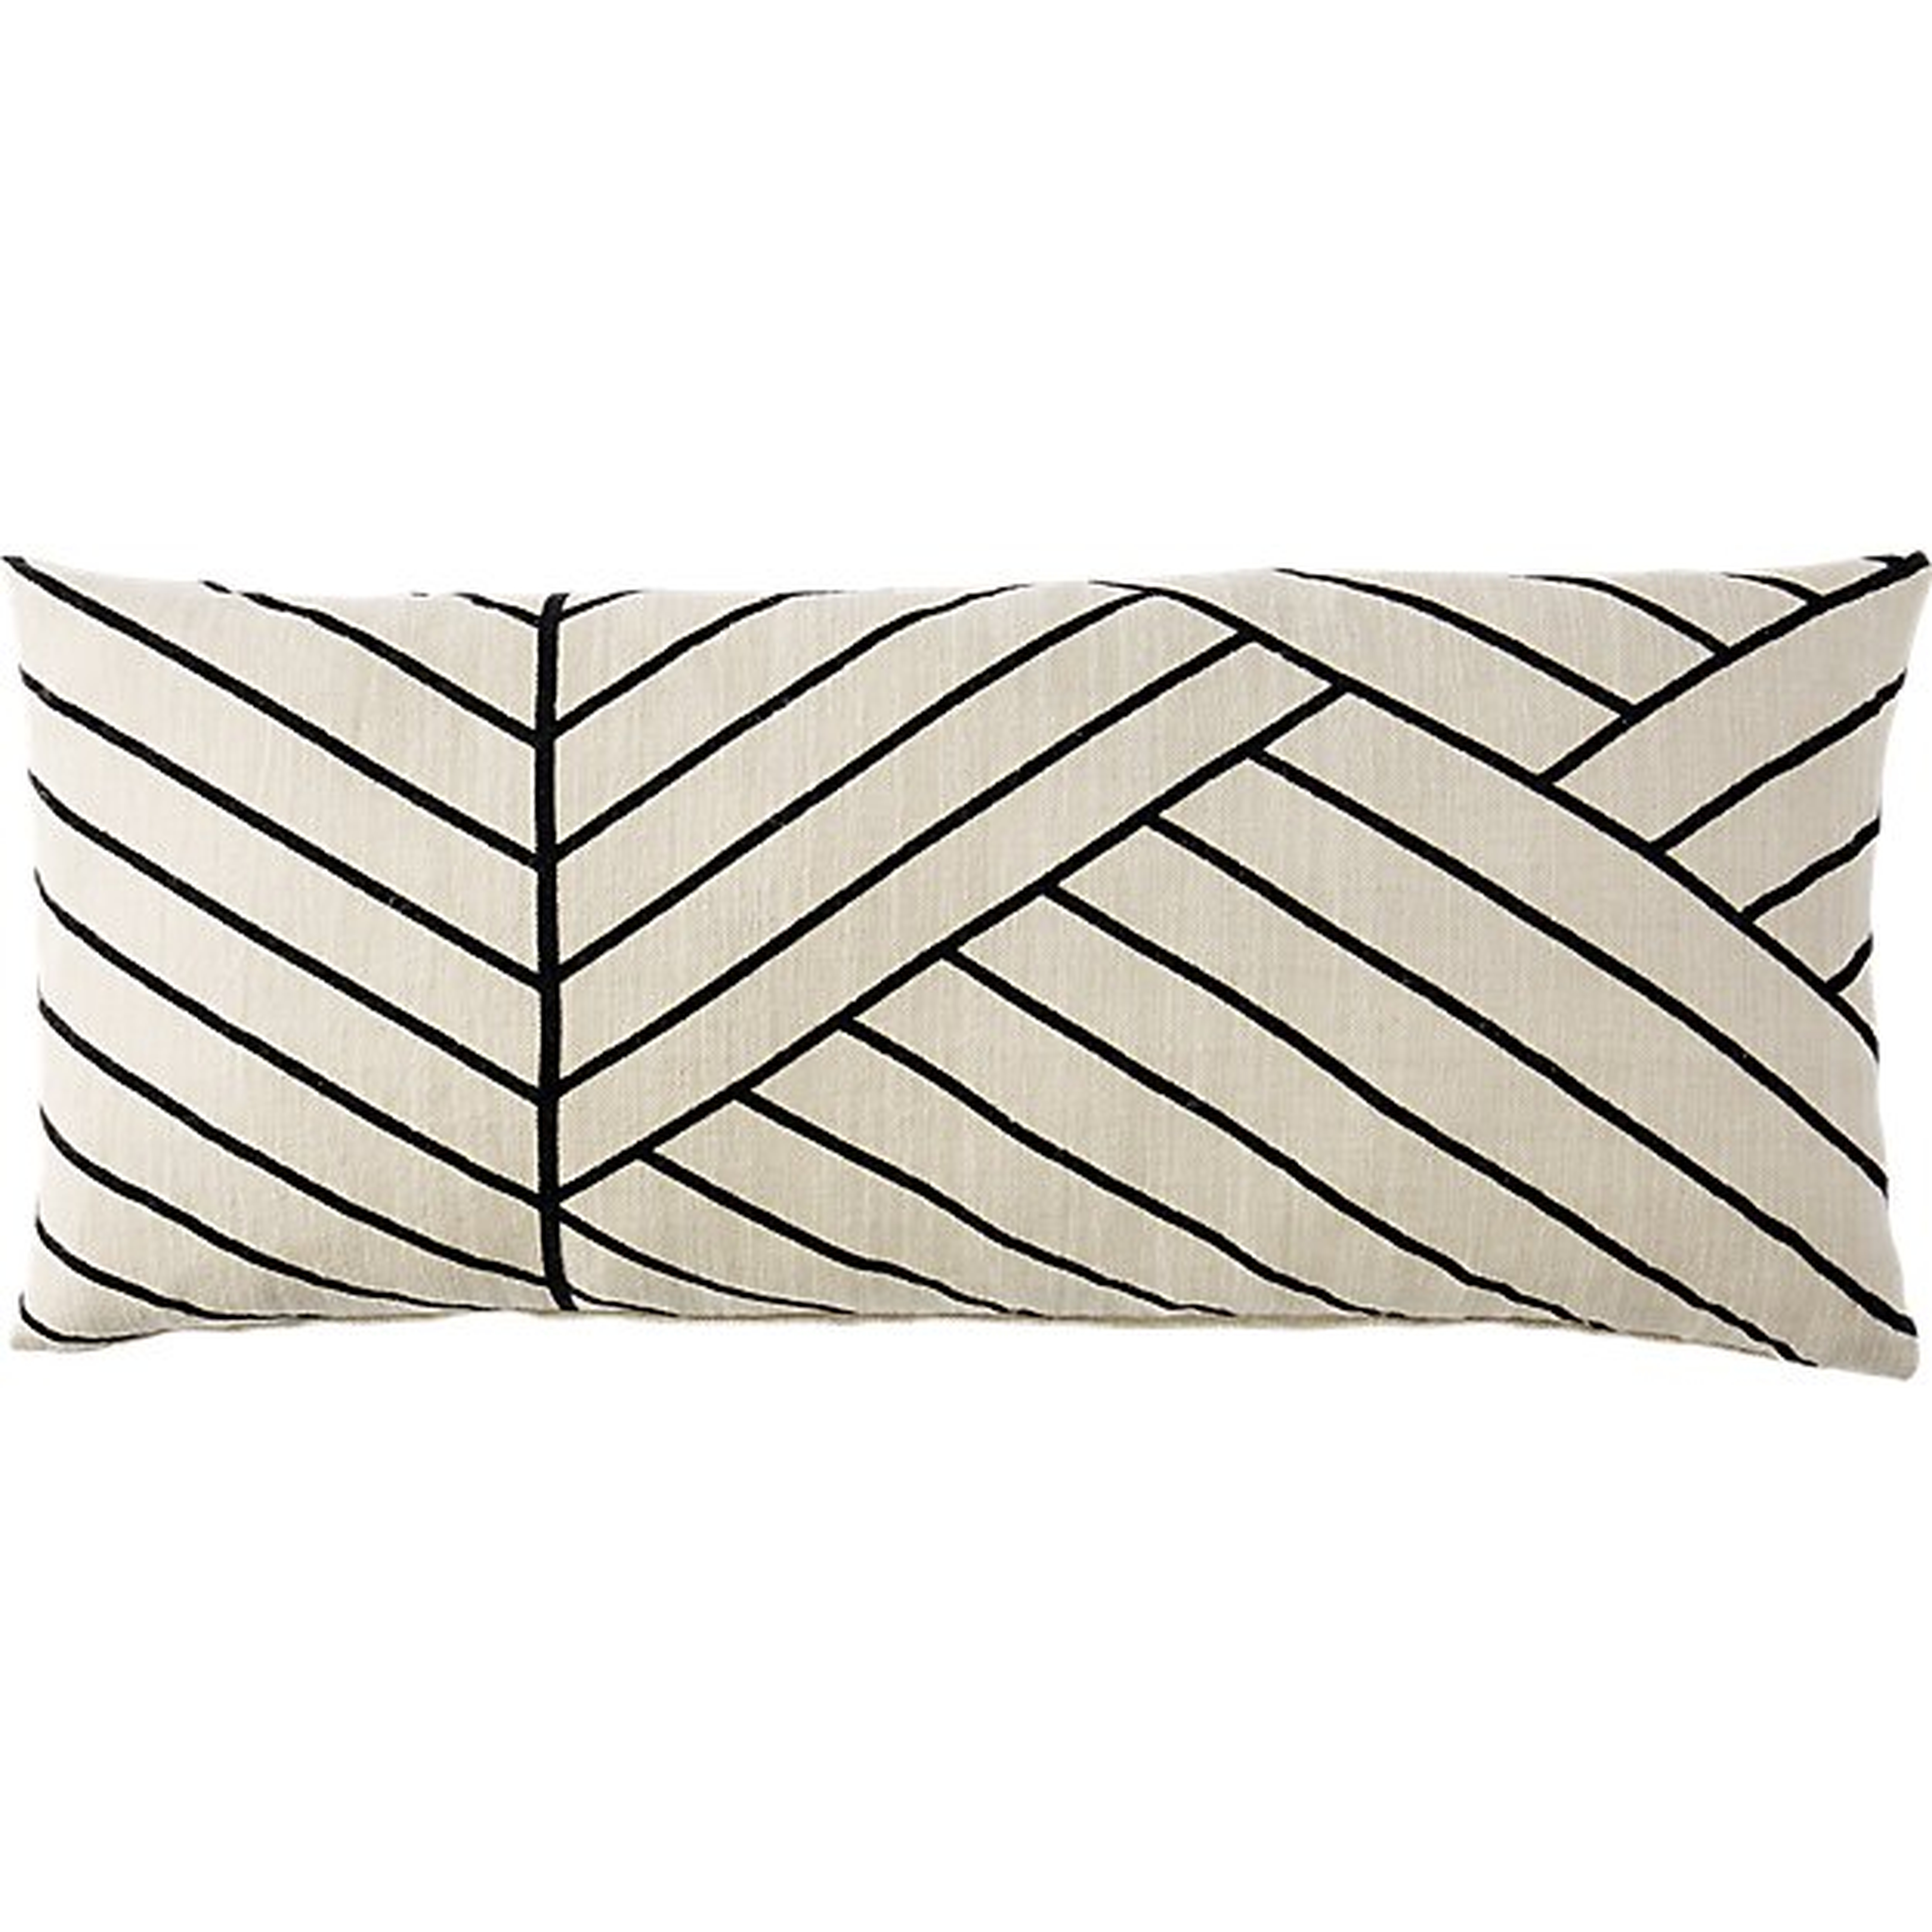 Forma Pillow, Feather-Down Insert, Black & Ivory, 36"x16" - CB2